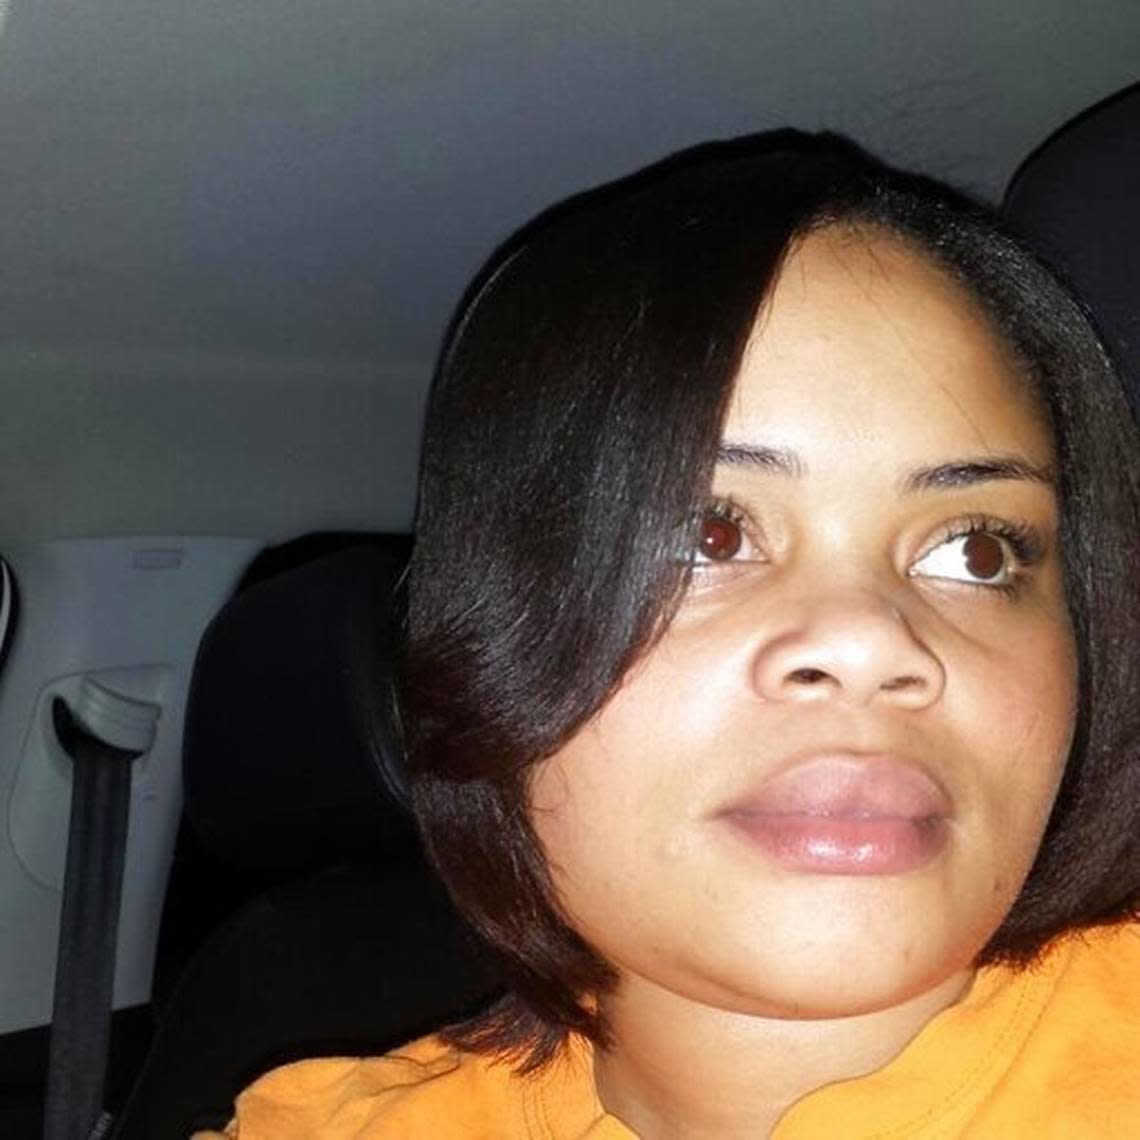 Atatiana Jefferson was shot and killed on Oct. 12, 2019, by a Fort Worth police officer.